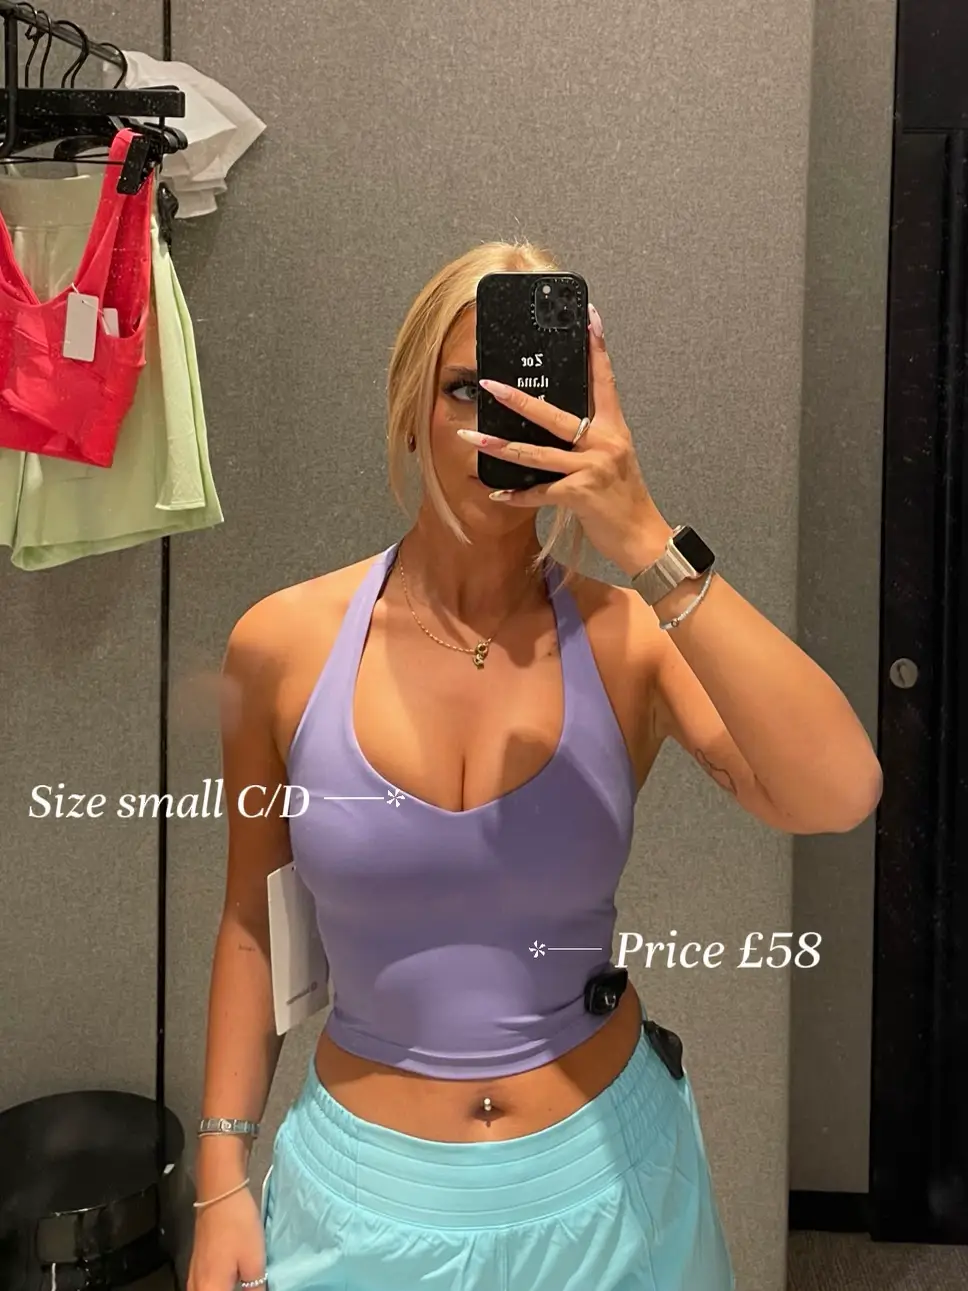 Lululemon summer sports bra try on, Gallery posted by zoeilanahill